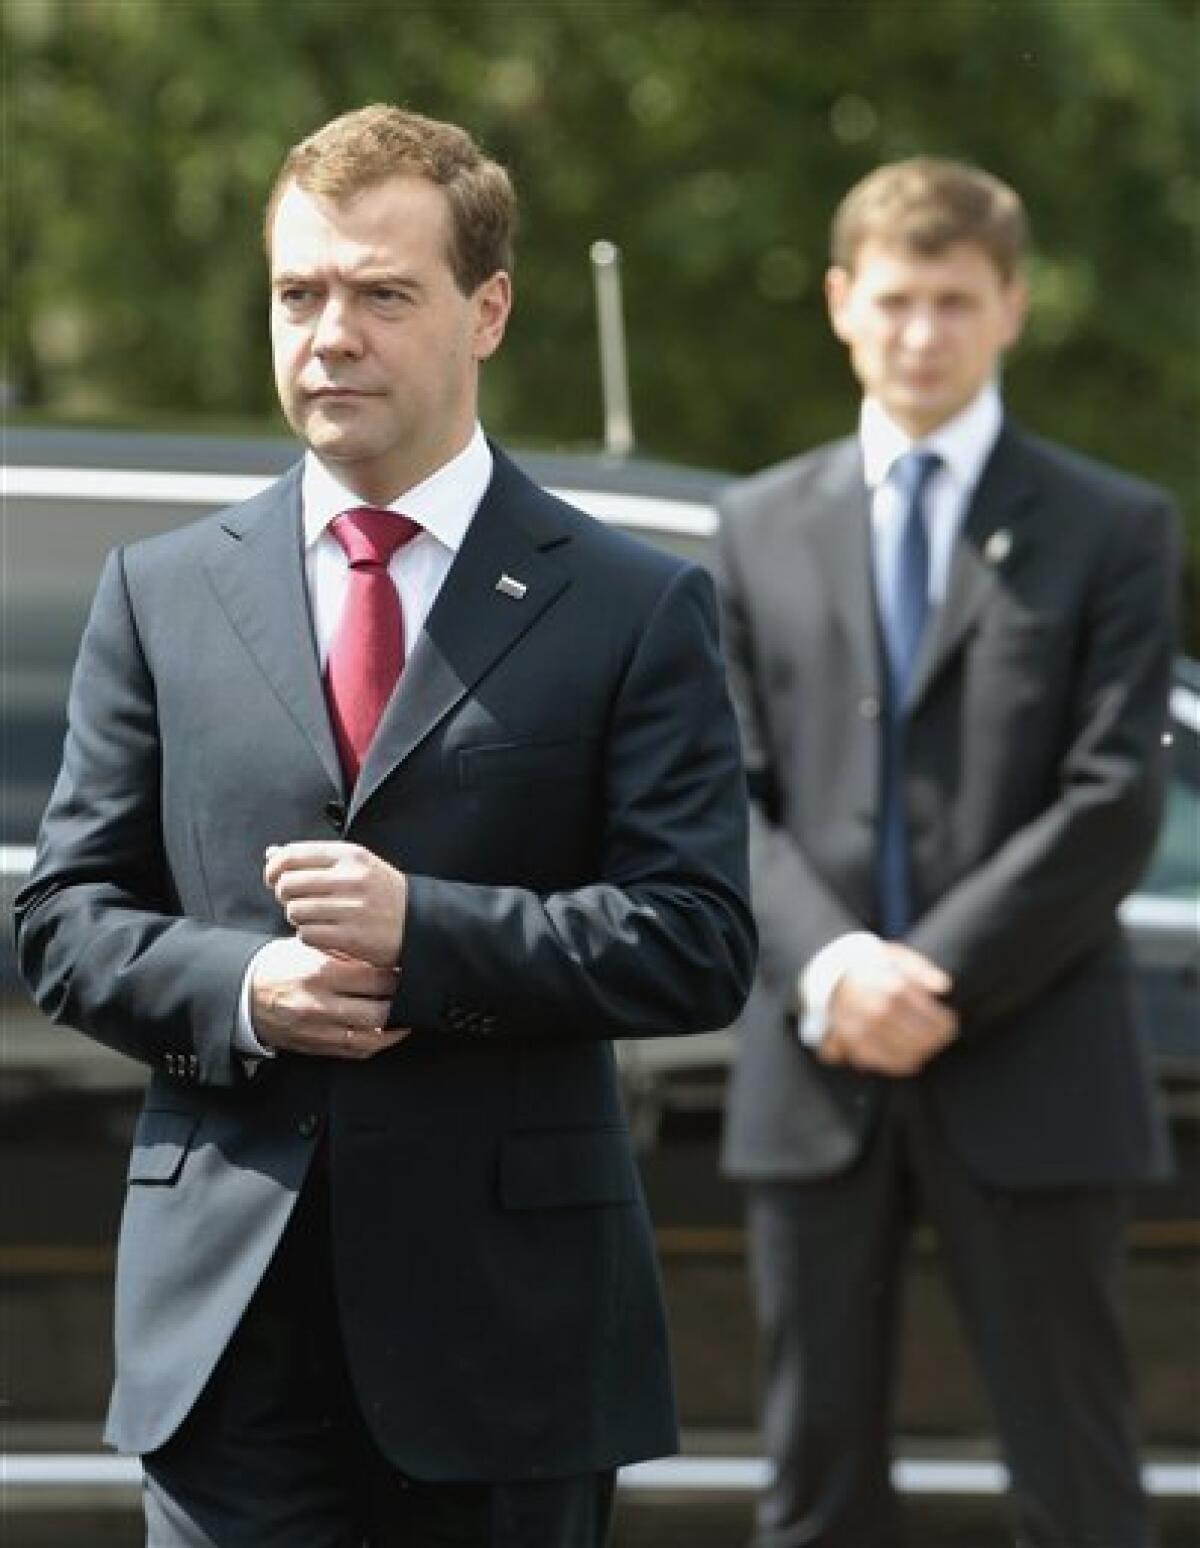 Russia's President Dmitry Medvedev arrives for a state reception to mark the Day of Russia in the Moscow Kremlin, on Saturday, June 12, 2010. Kyrgyzstan on Saturday asked Russia to send troops to end ethnic violence in the impoverished nation that hosts U.S. and Russian military bases. There was no immediate response from Moscow to Otunbayeva's plea for help. (AP Photo/Alexander Natruskin, Pool)